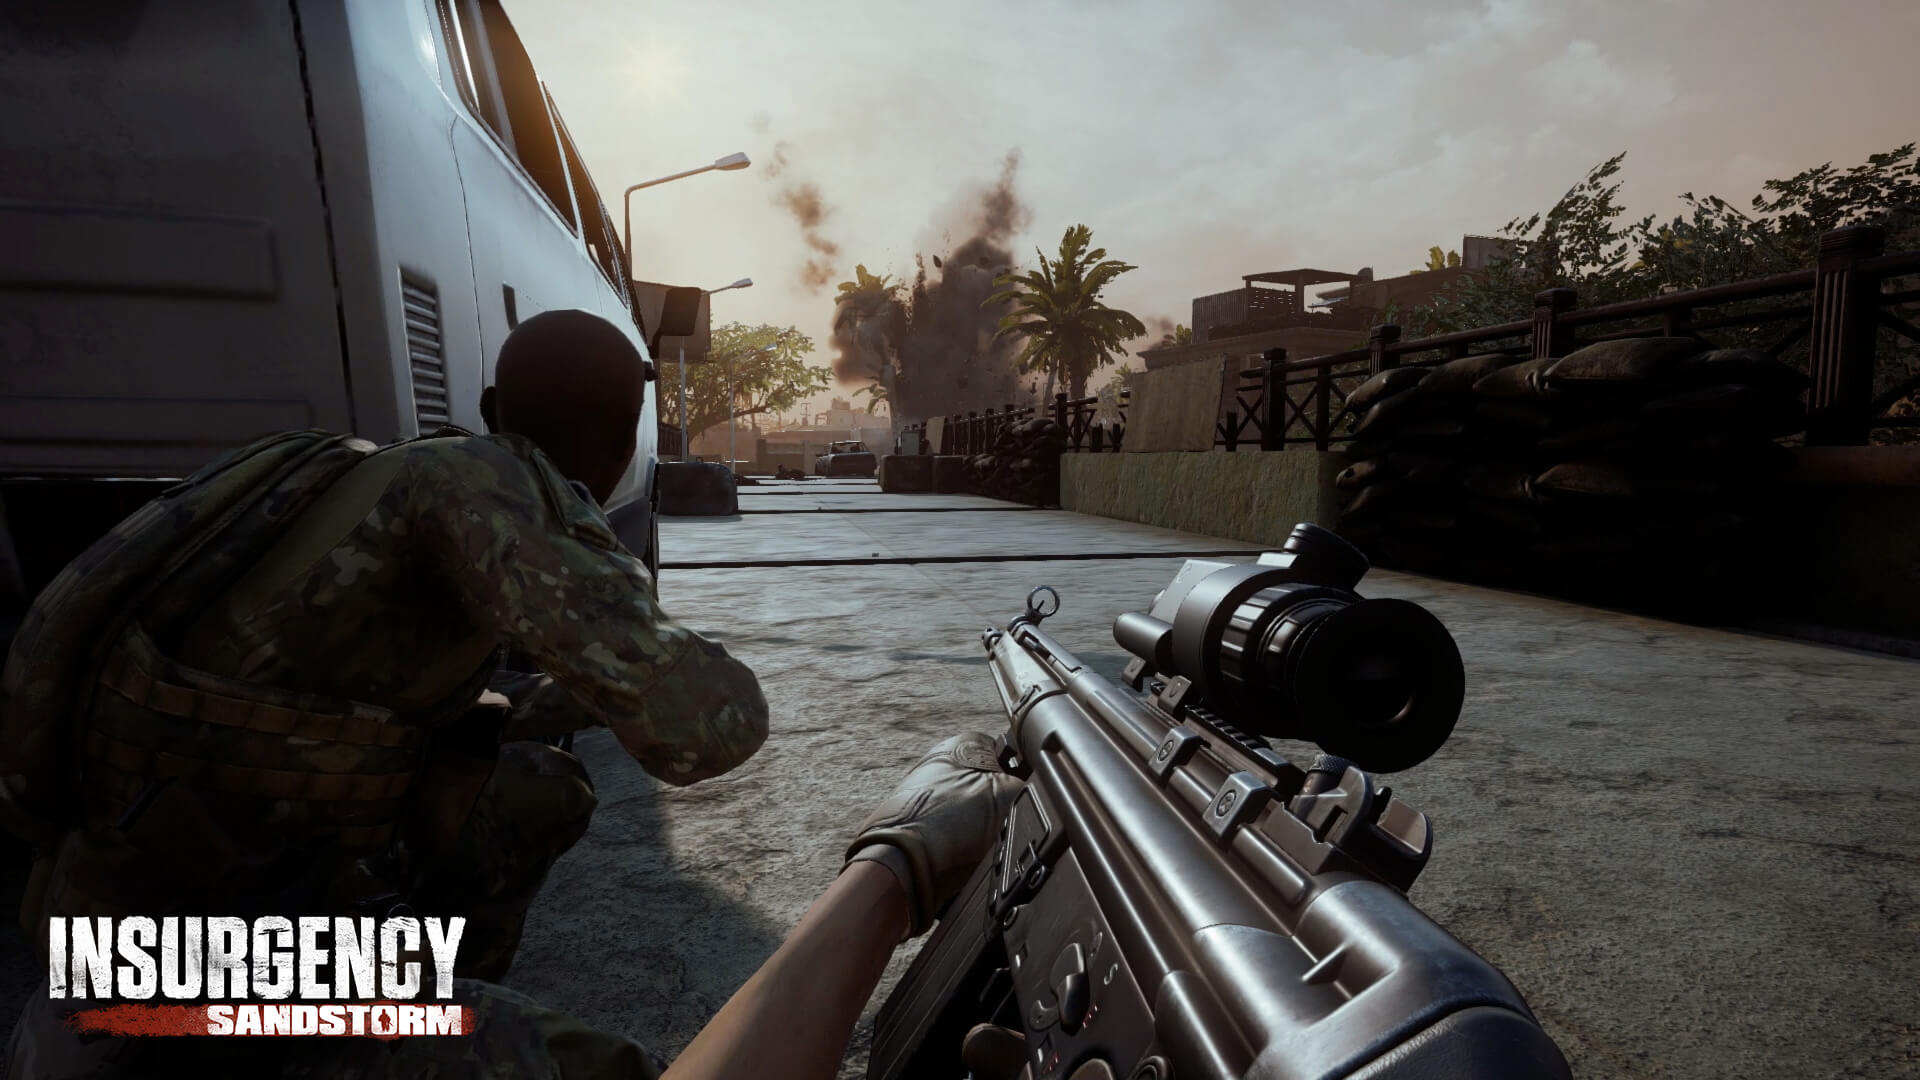 Image for Insurgency: Sandstorm PC release date set, first beta now live